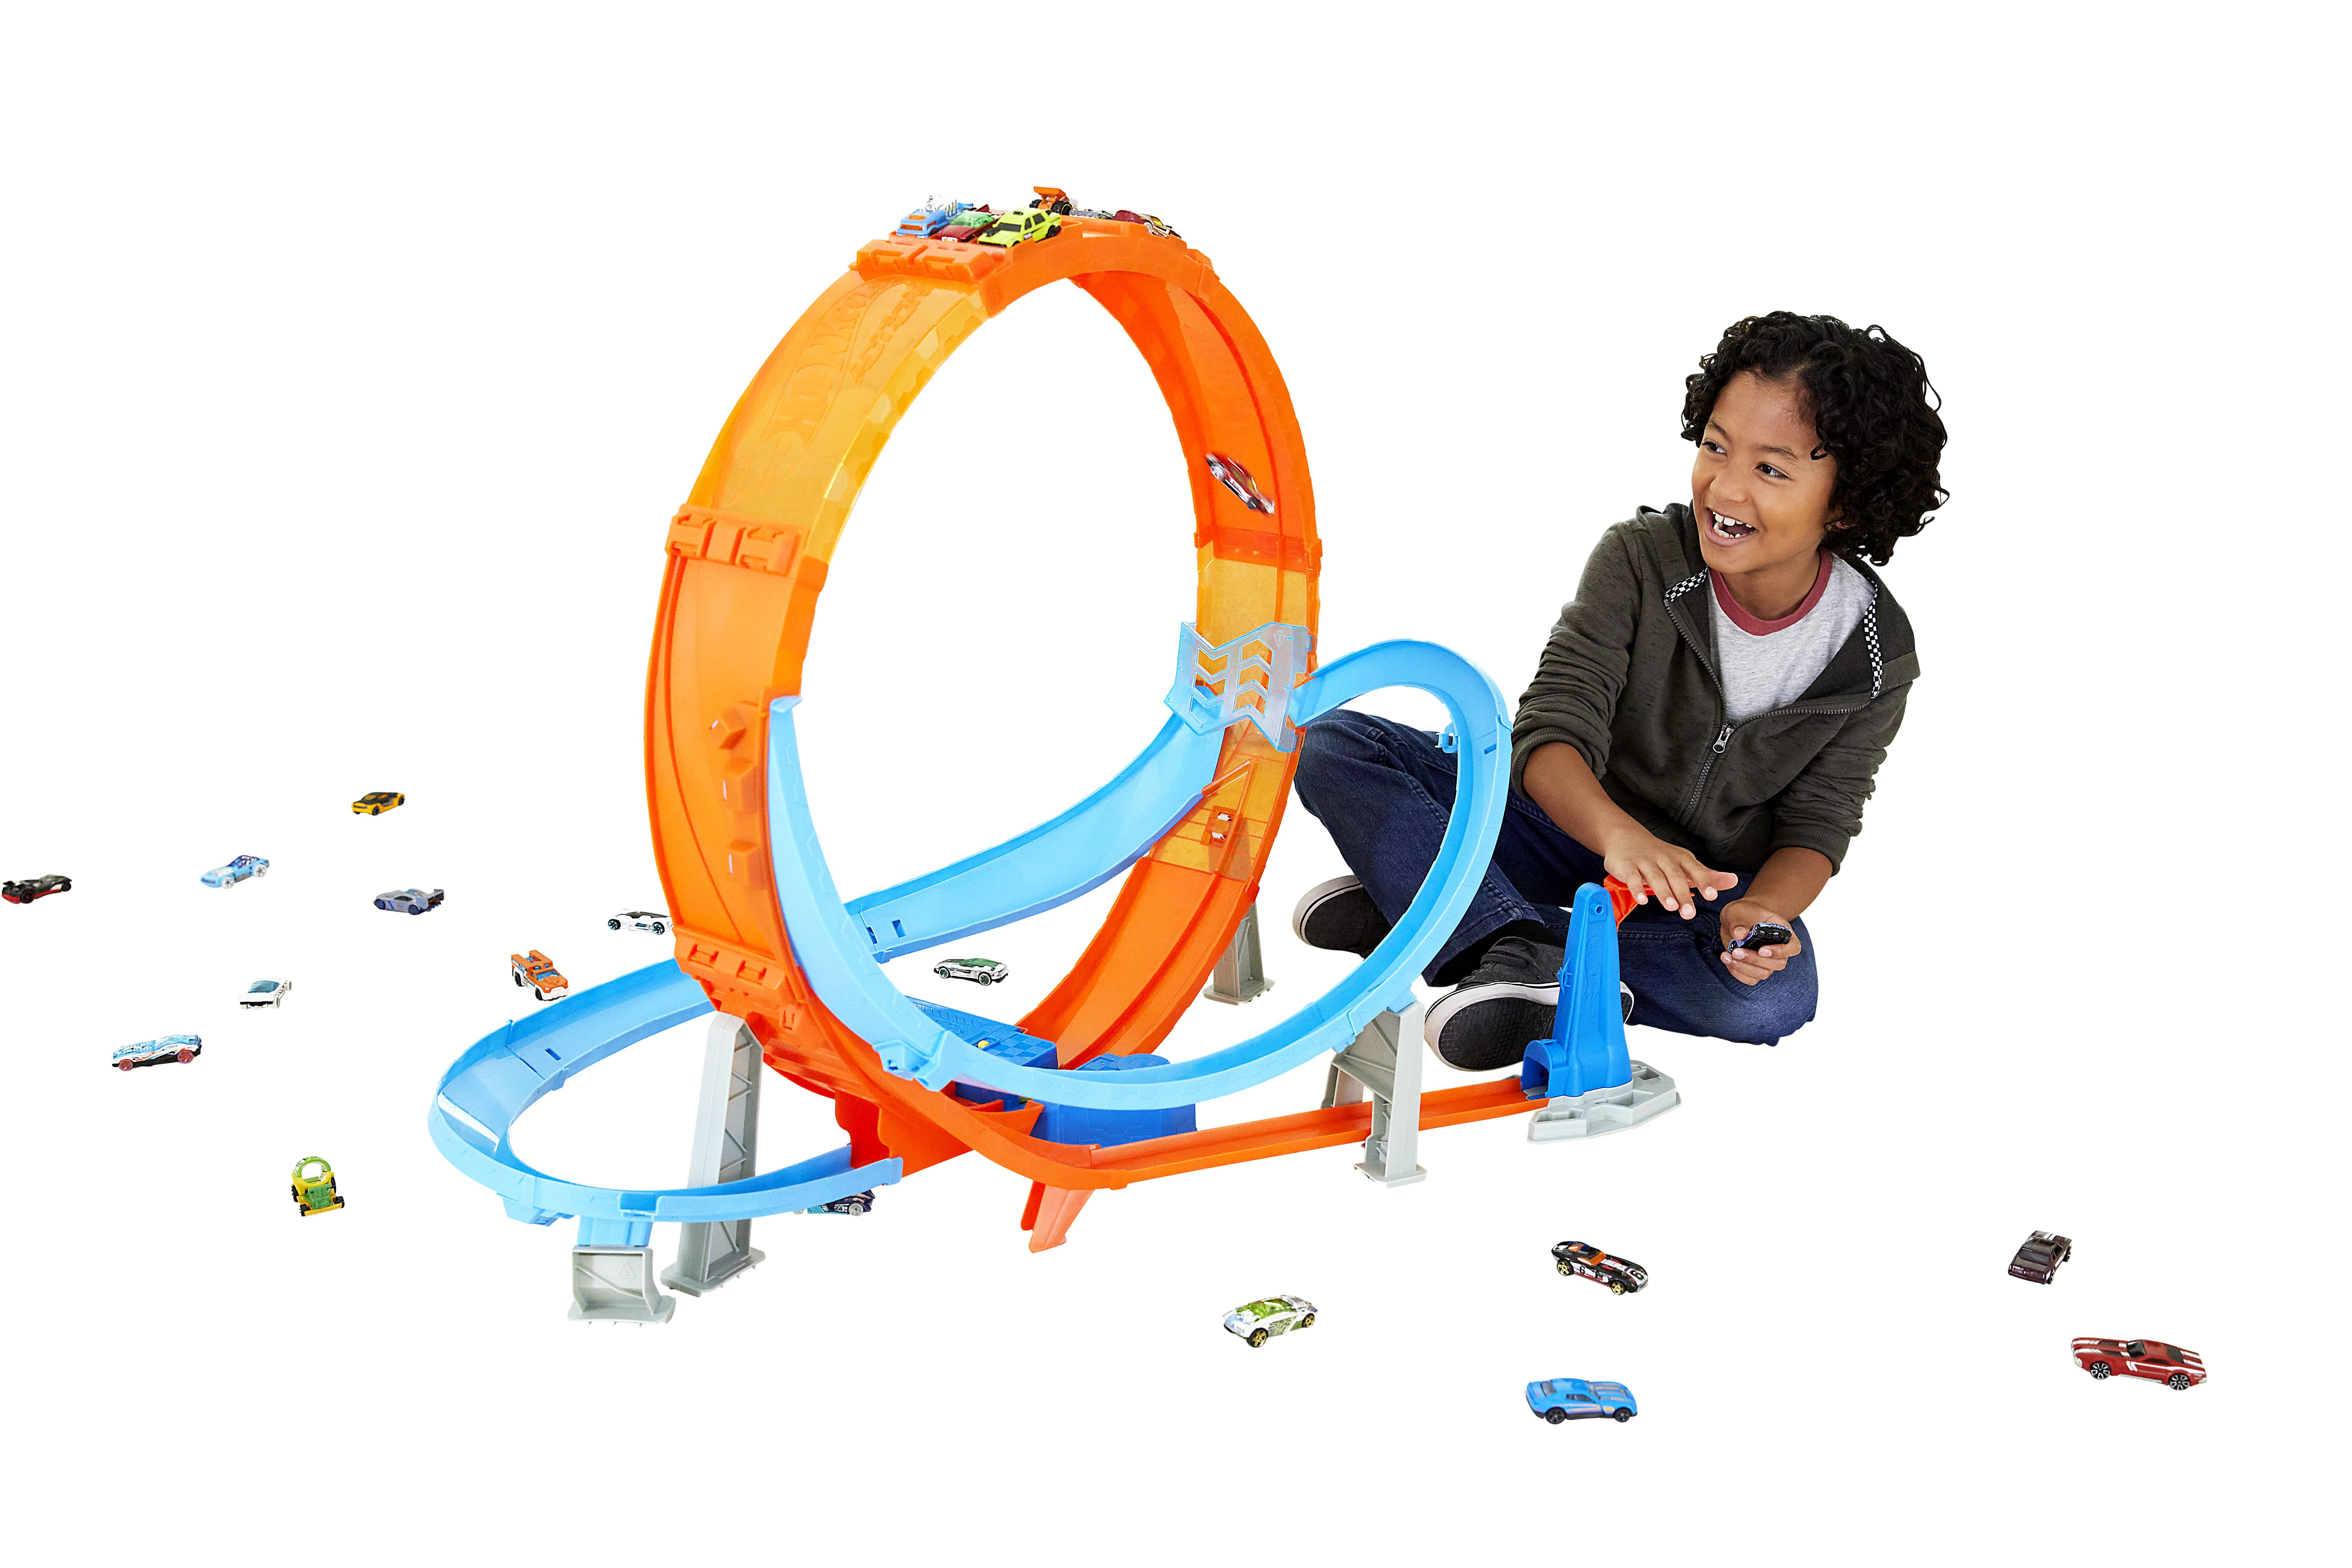 Hot Wheels Track Set Builder Loops W/ Booster Cars Racetrack Toys Kids Play Game 